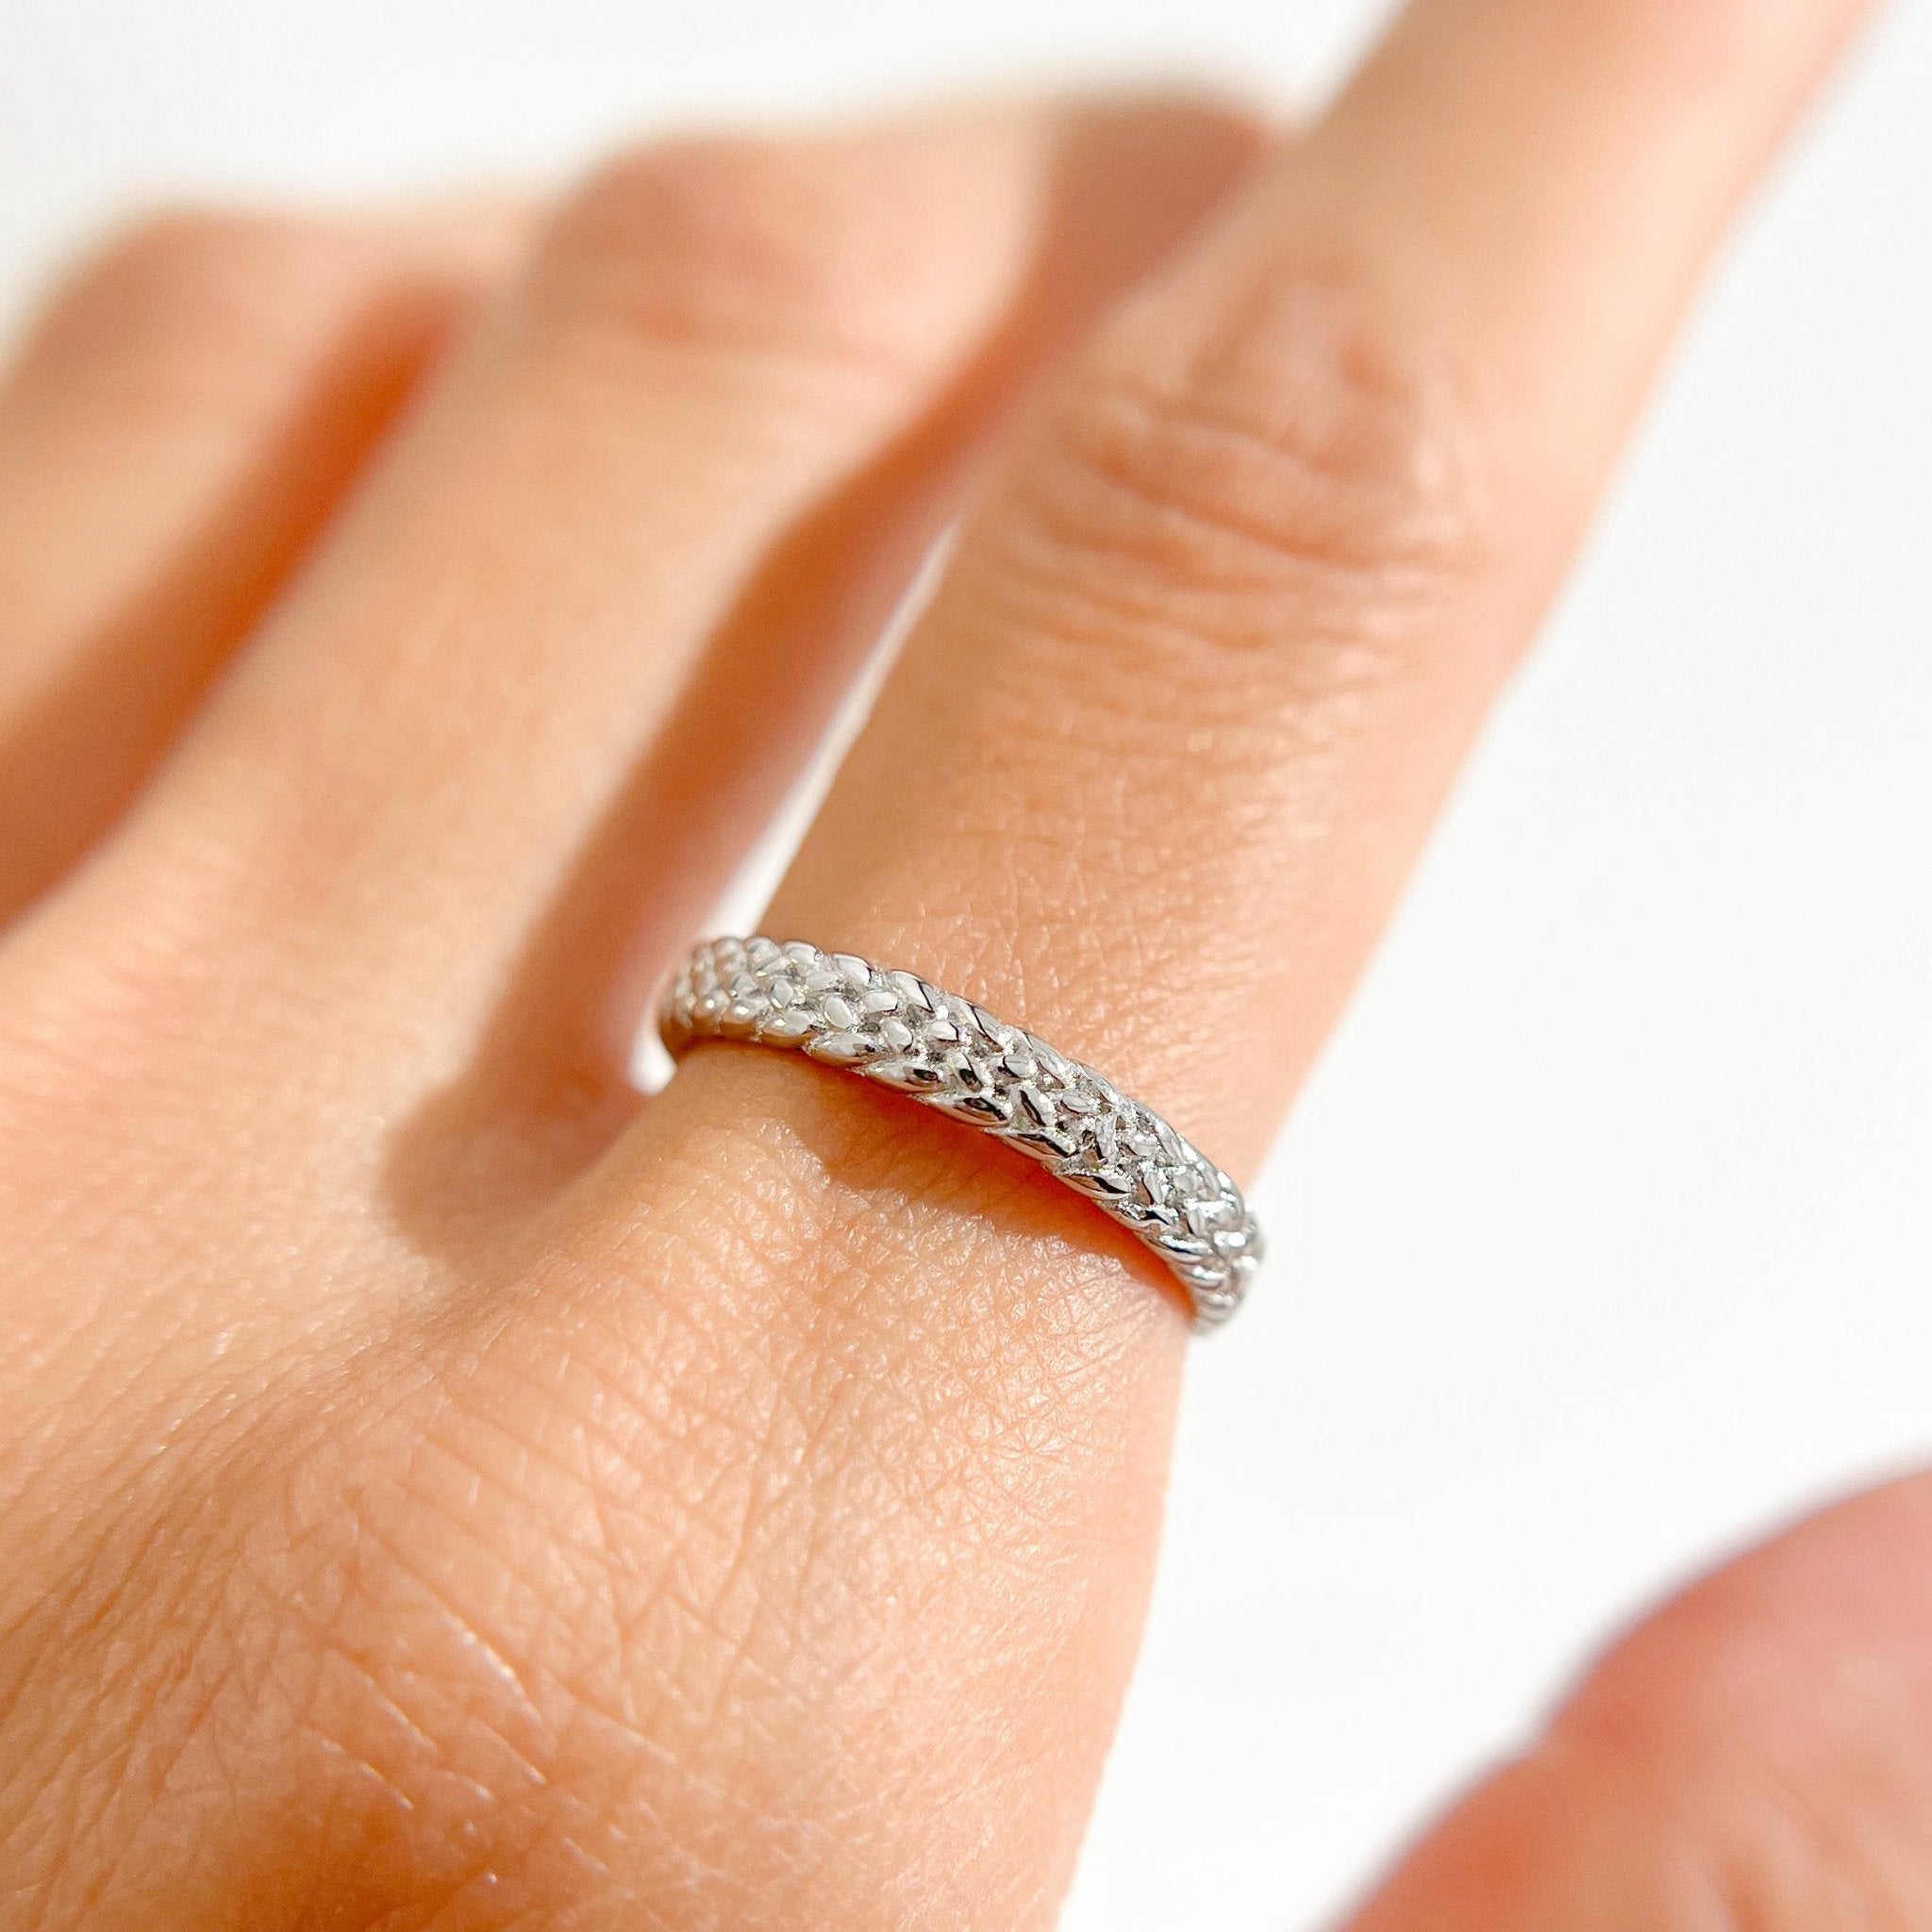 Thin Weave Ring in Silver - Flaire & Co.